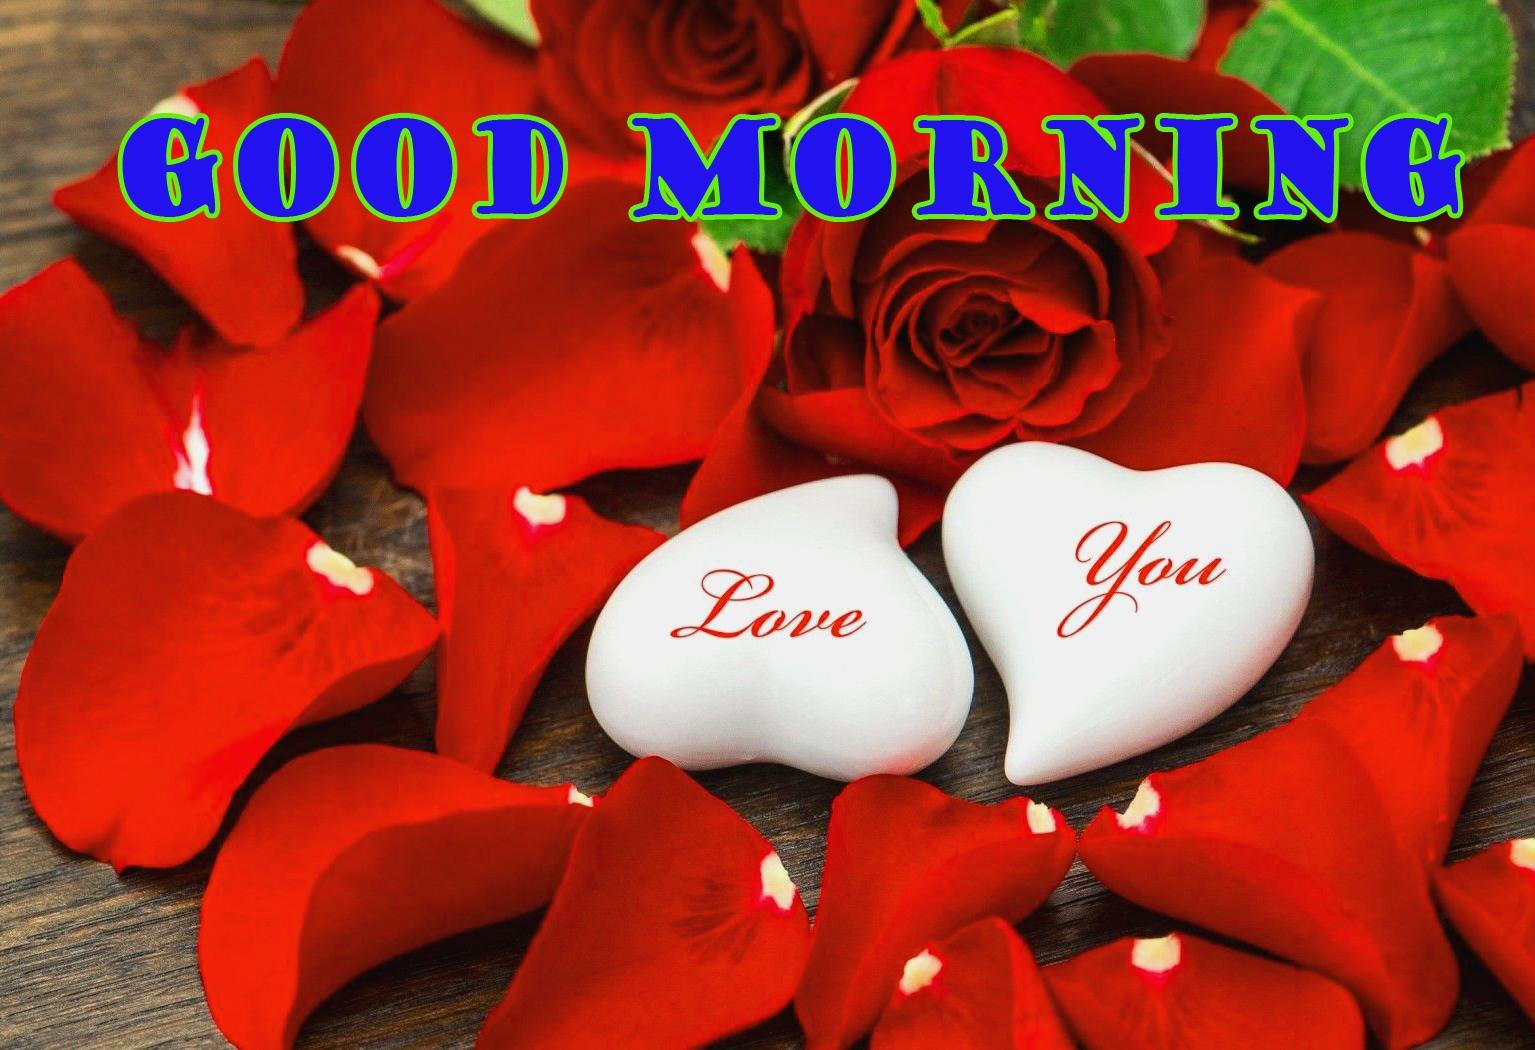 Good Morning Red Rose Image Wallpaper Picture Free